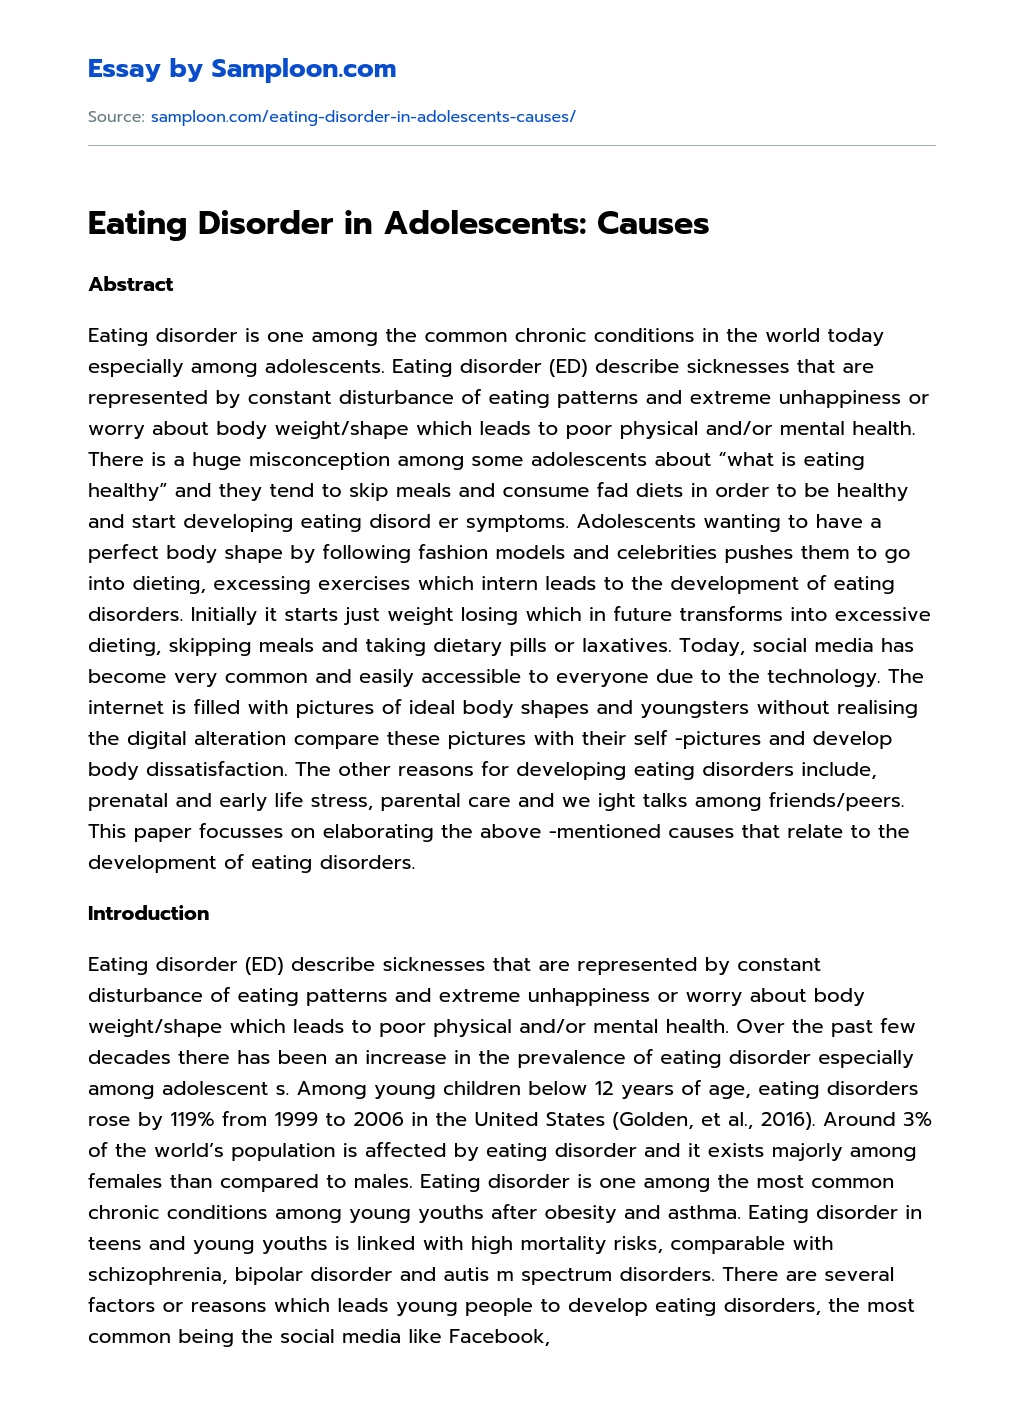 Eating Disorder in Adolescents: Causes essay